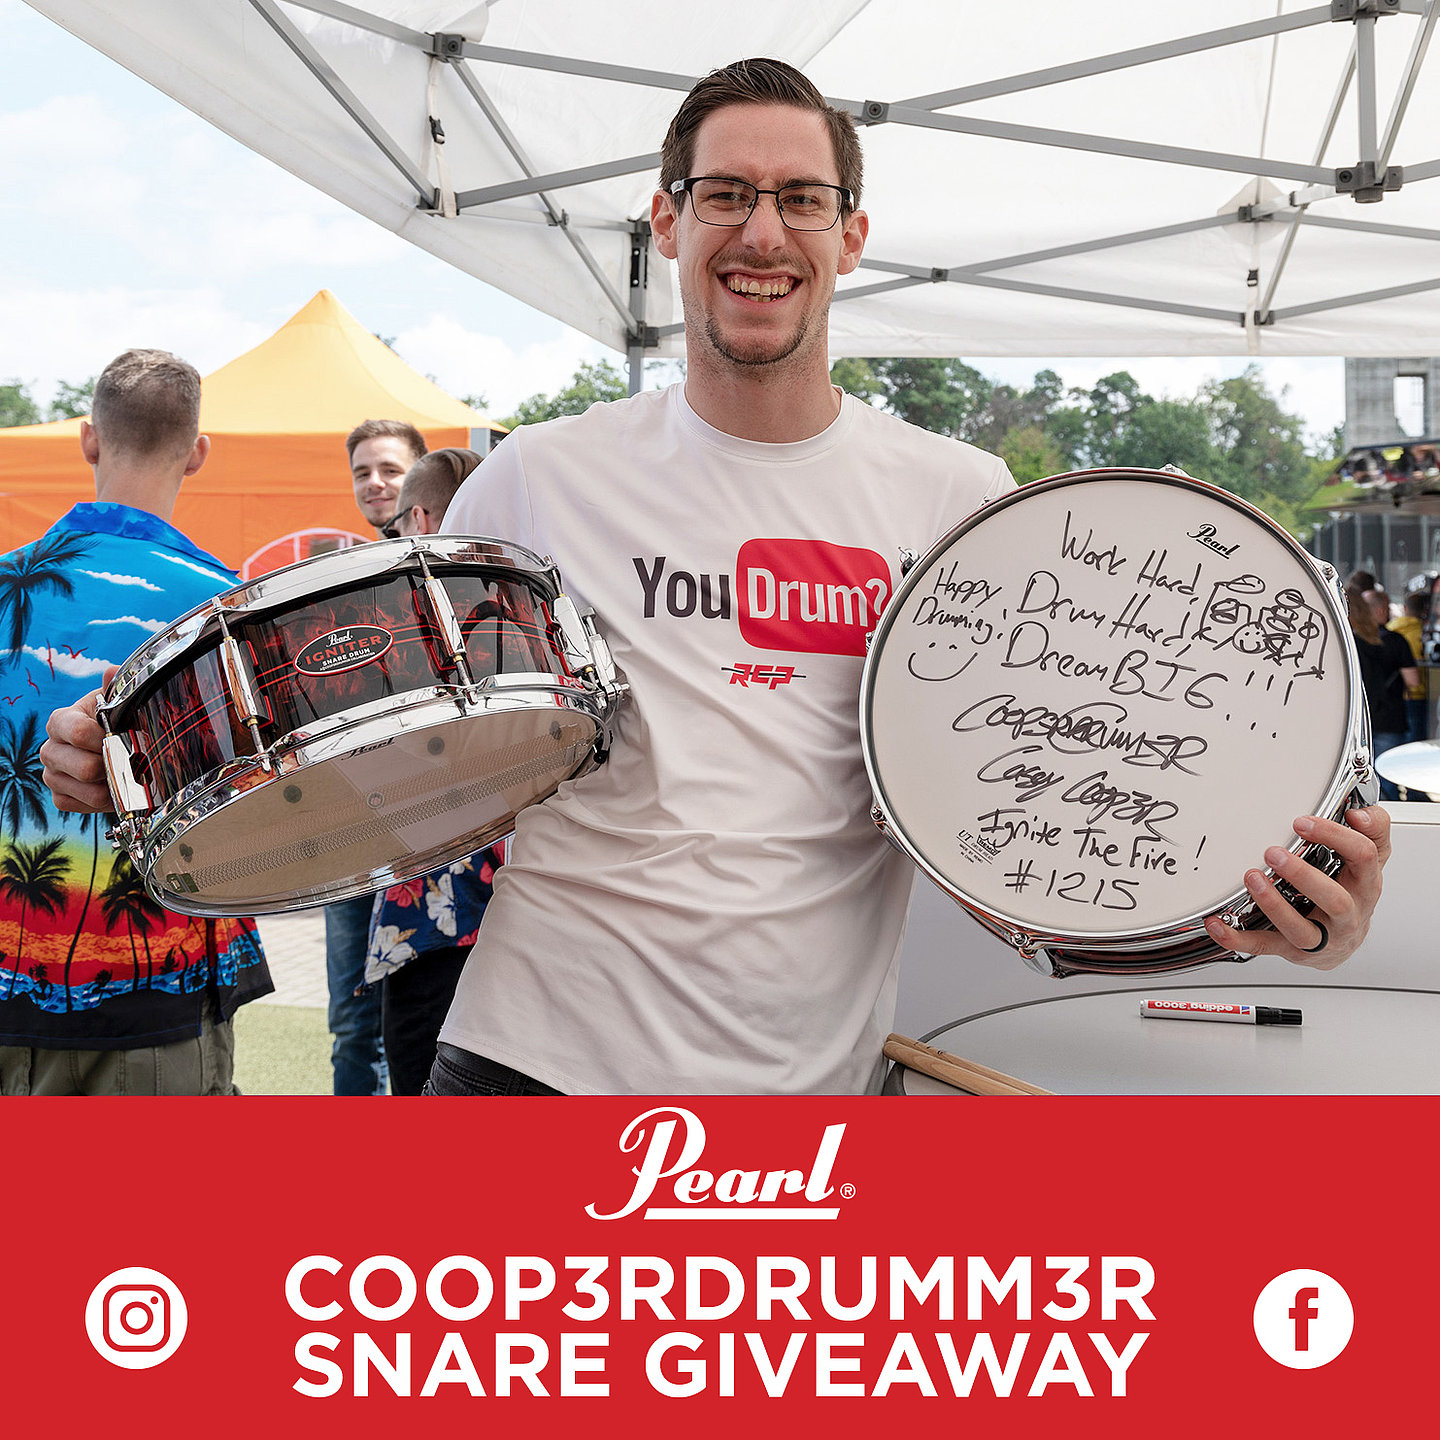 COOPP3RDRUMM3R SNARE GIVEAWAY